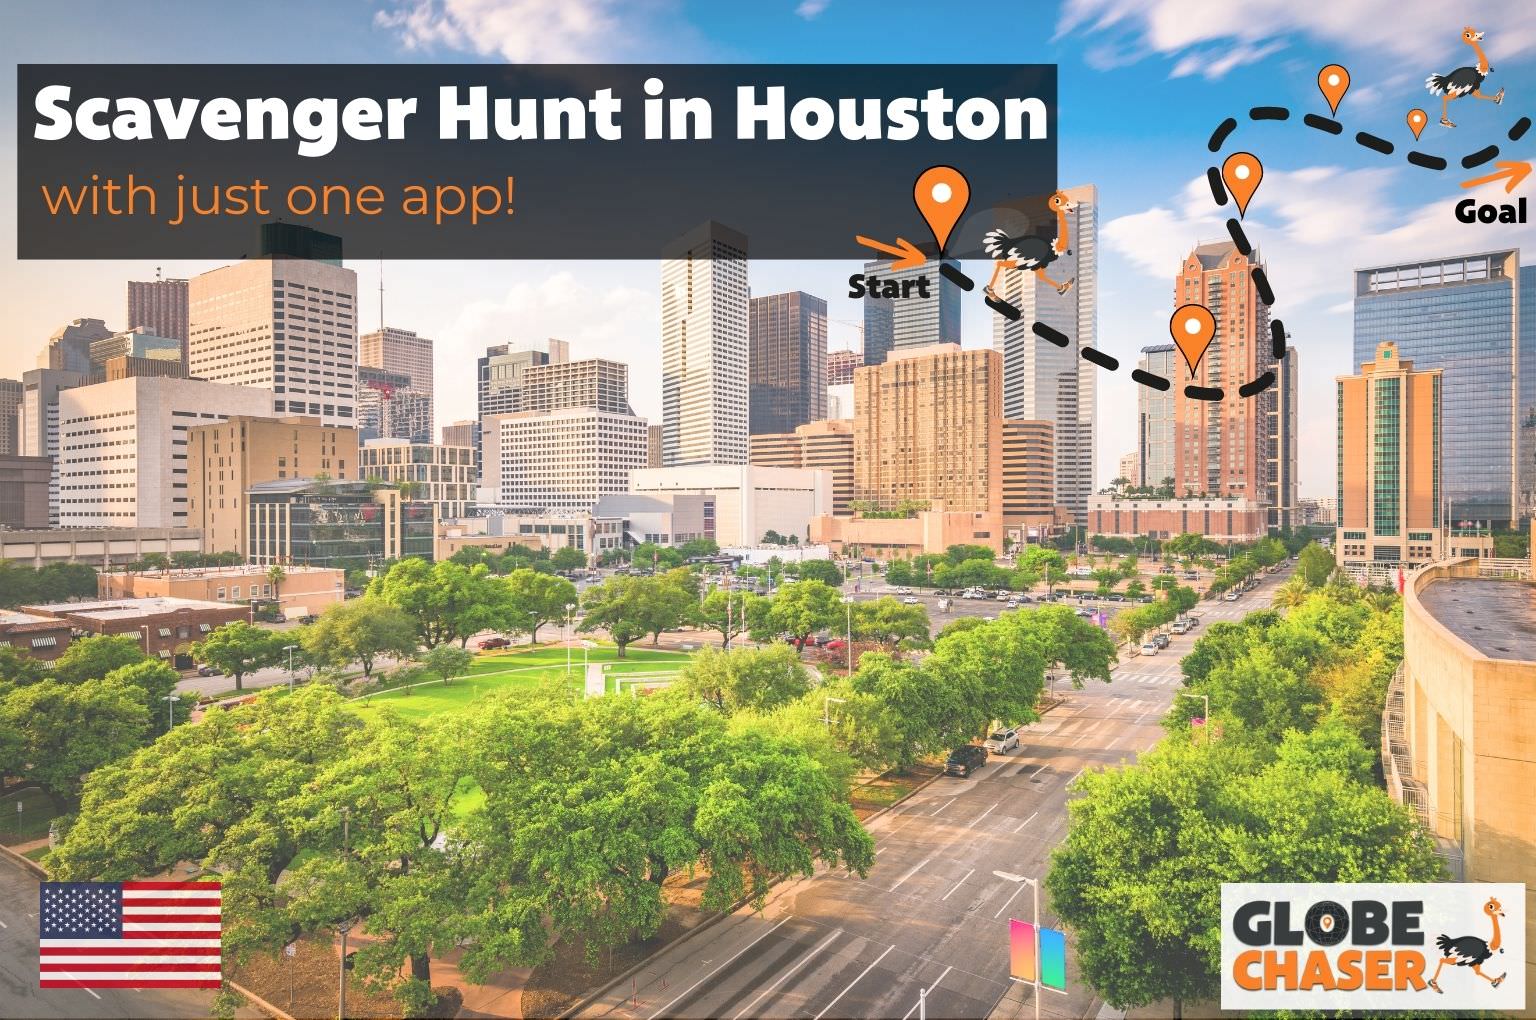 Scavenger Hunt in Houston, USA - Family Activities with the Globe Chaser App for Outdoor Fun